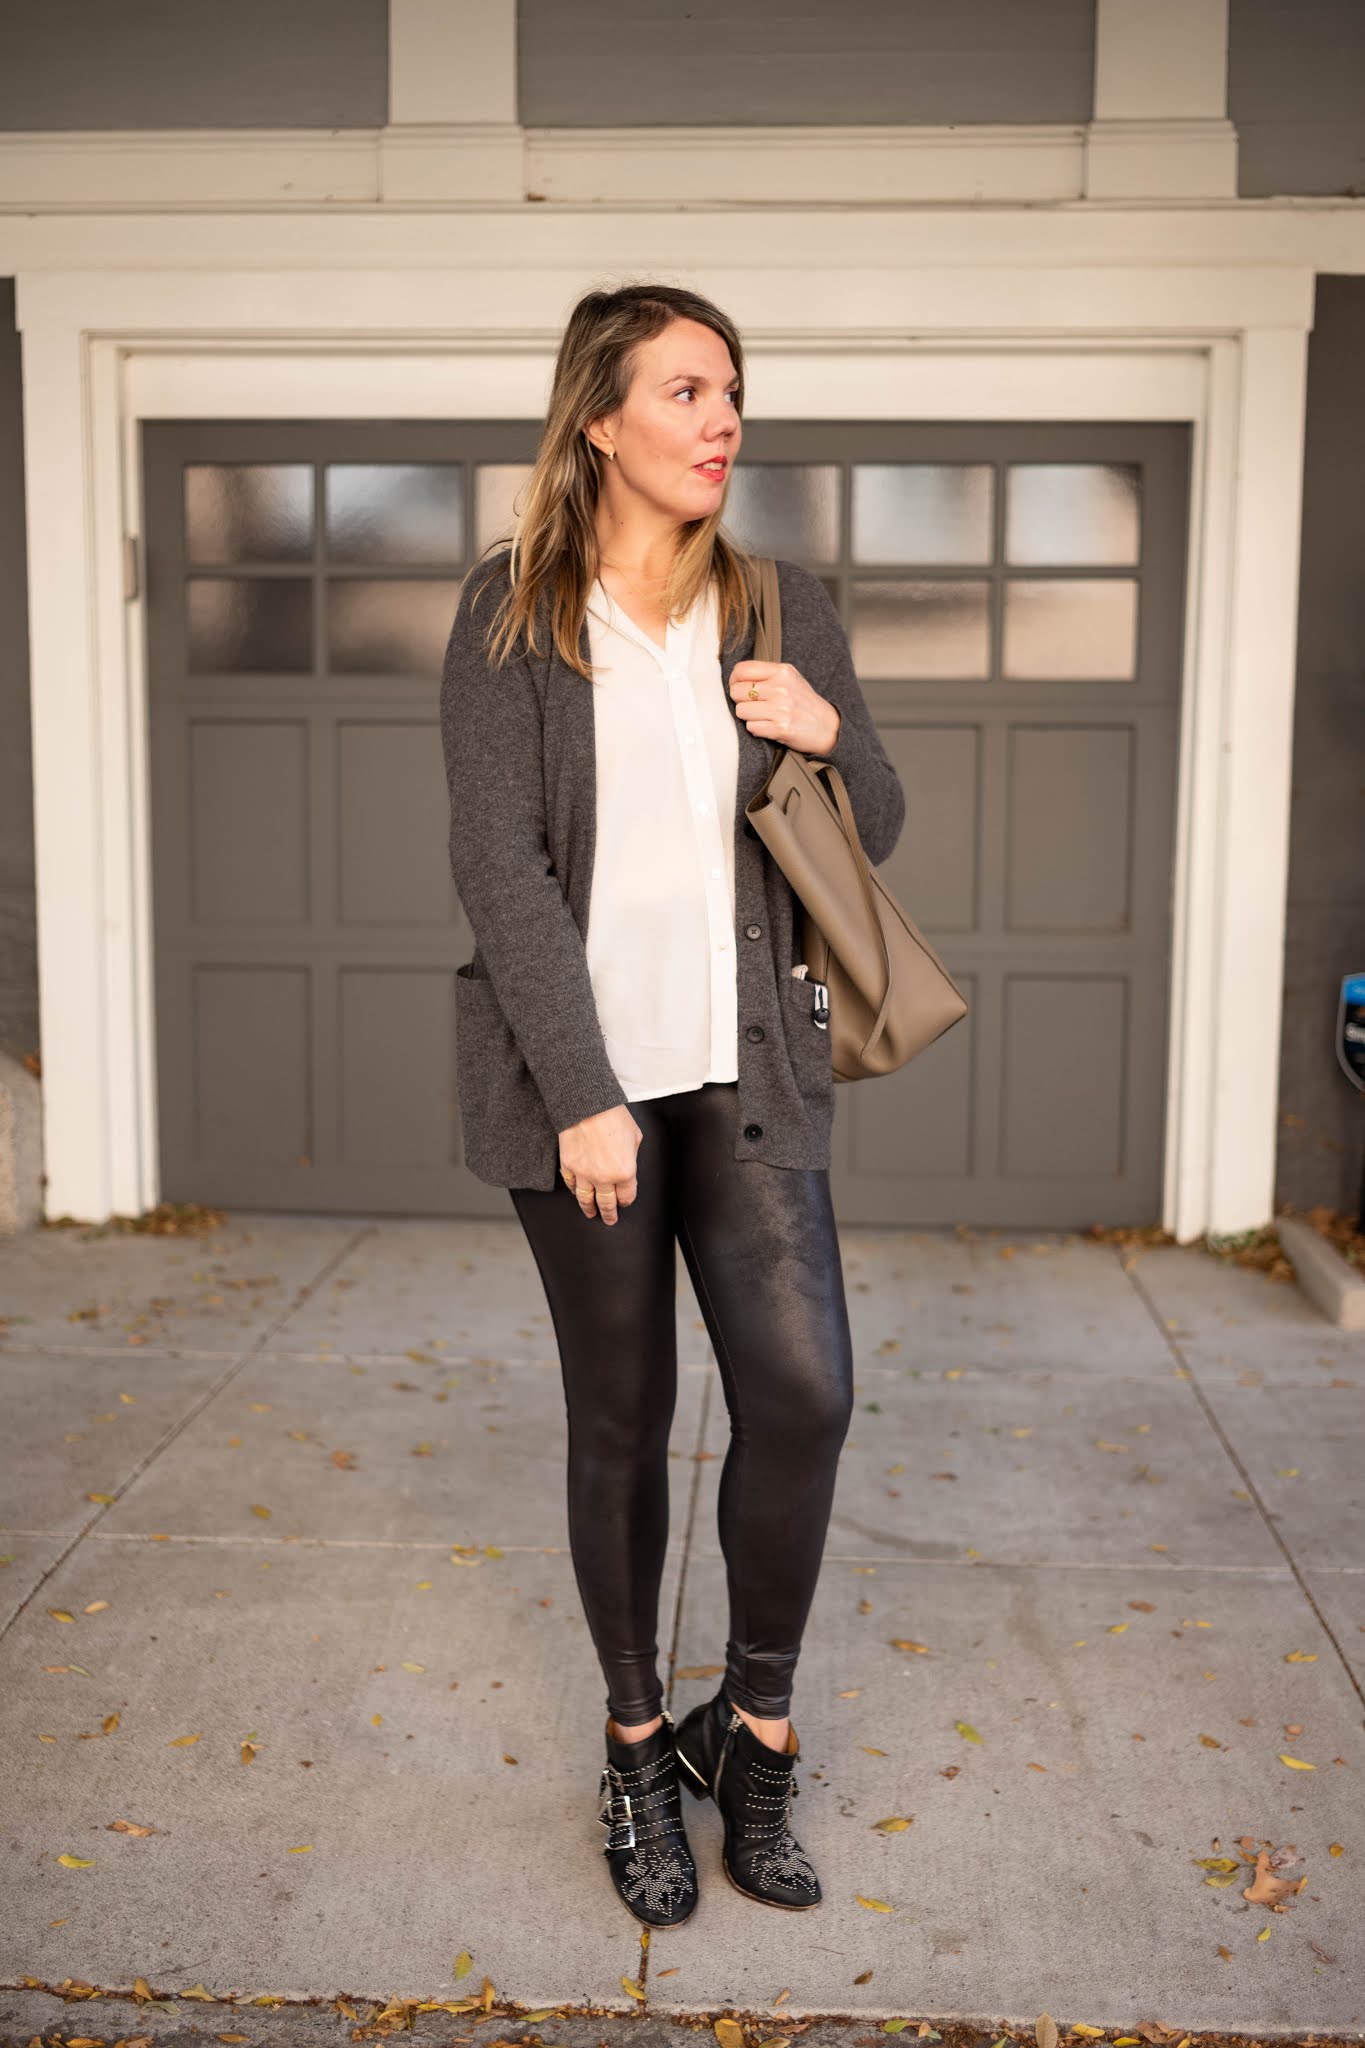 SPANX - Never go wrong with Faux Leather Leggings. Featured here